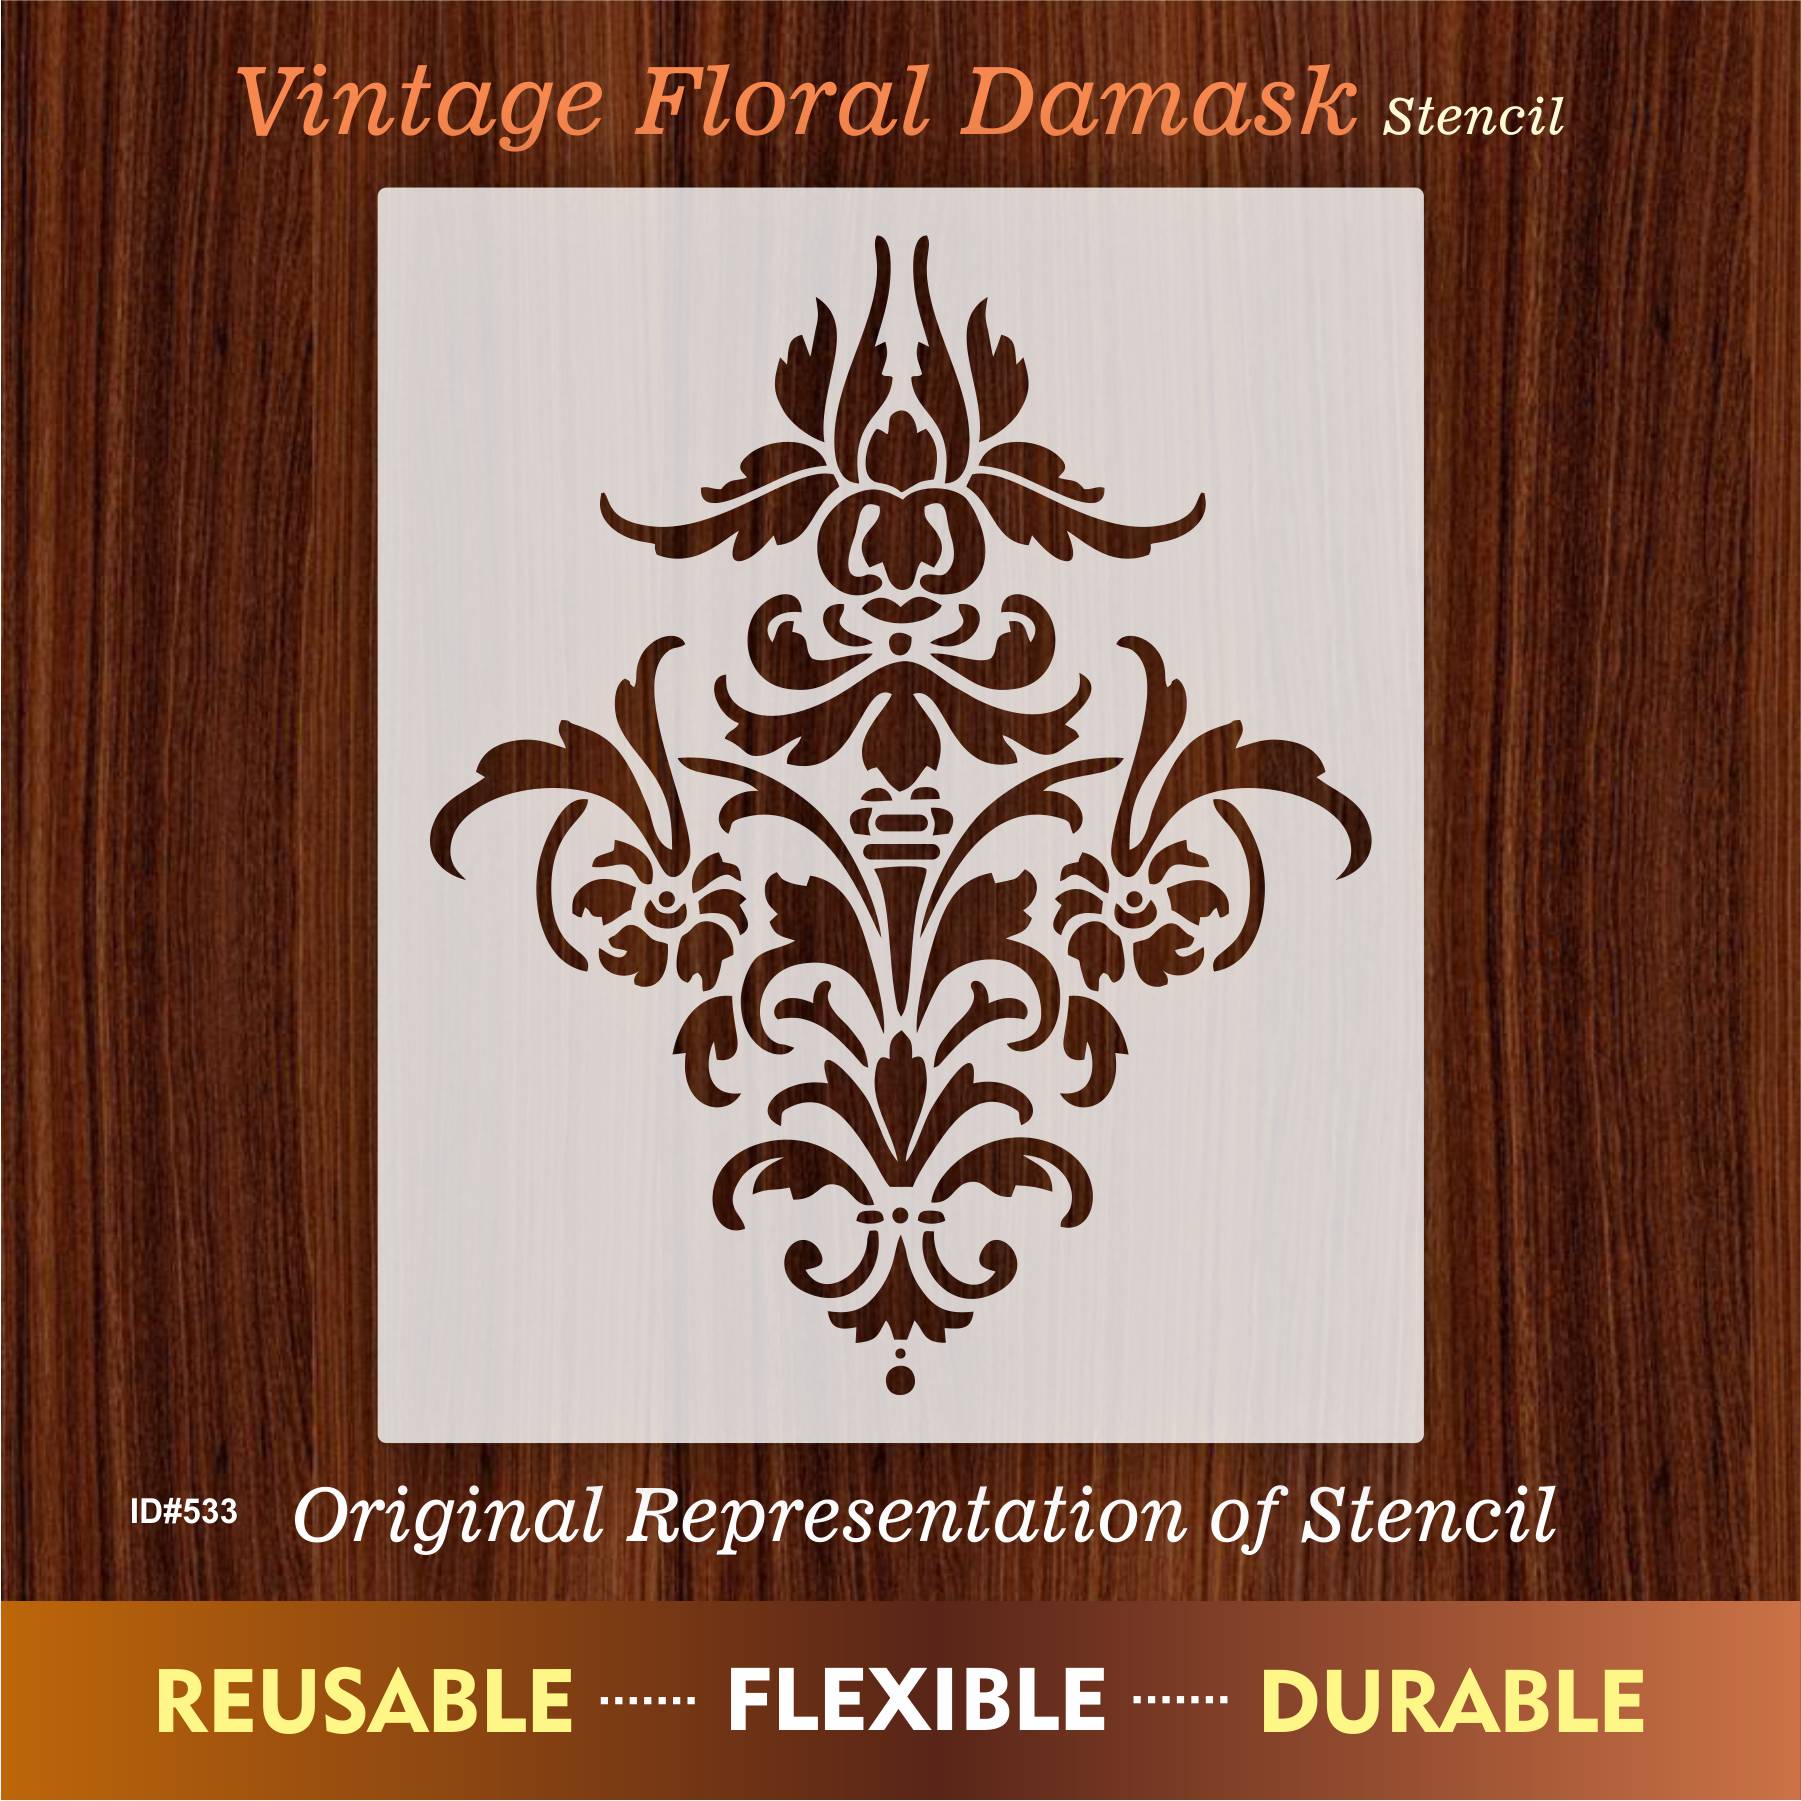 CrafTreat Damask Stencils for Painting on Wood Canvas Paper Fabric Floor  Wall and Tile - Damask Designs - Size: A4 (8.3 x 11.7 Inch) - Reusable DIY  Art and Craft Stencils 